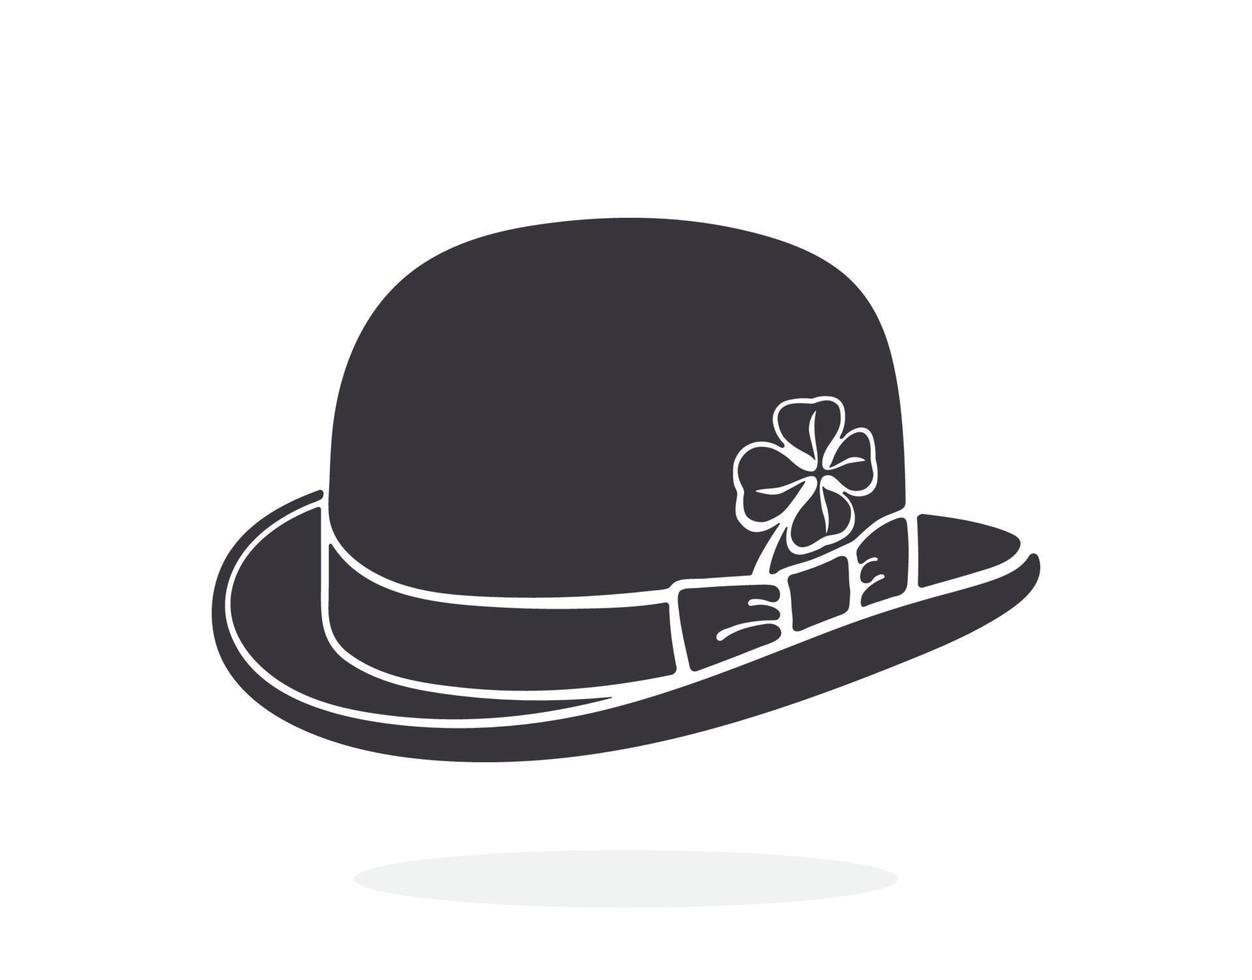 Silhouette icon of bowler hat with clover vector